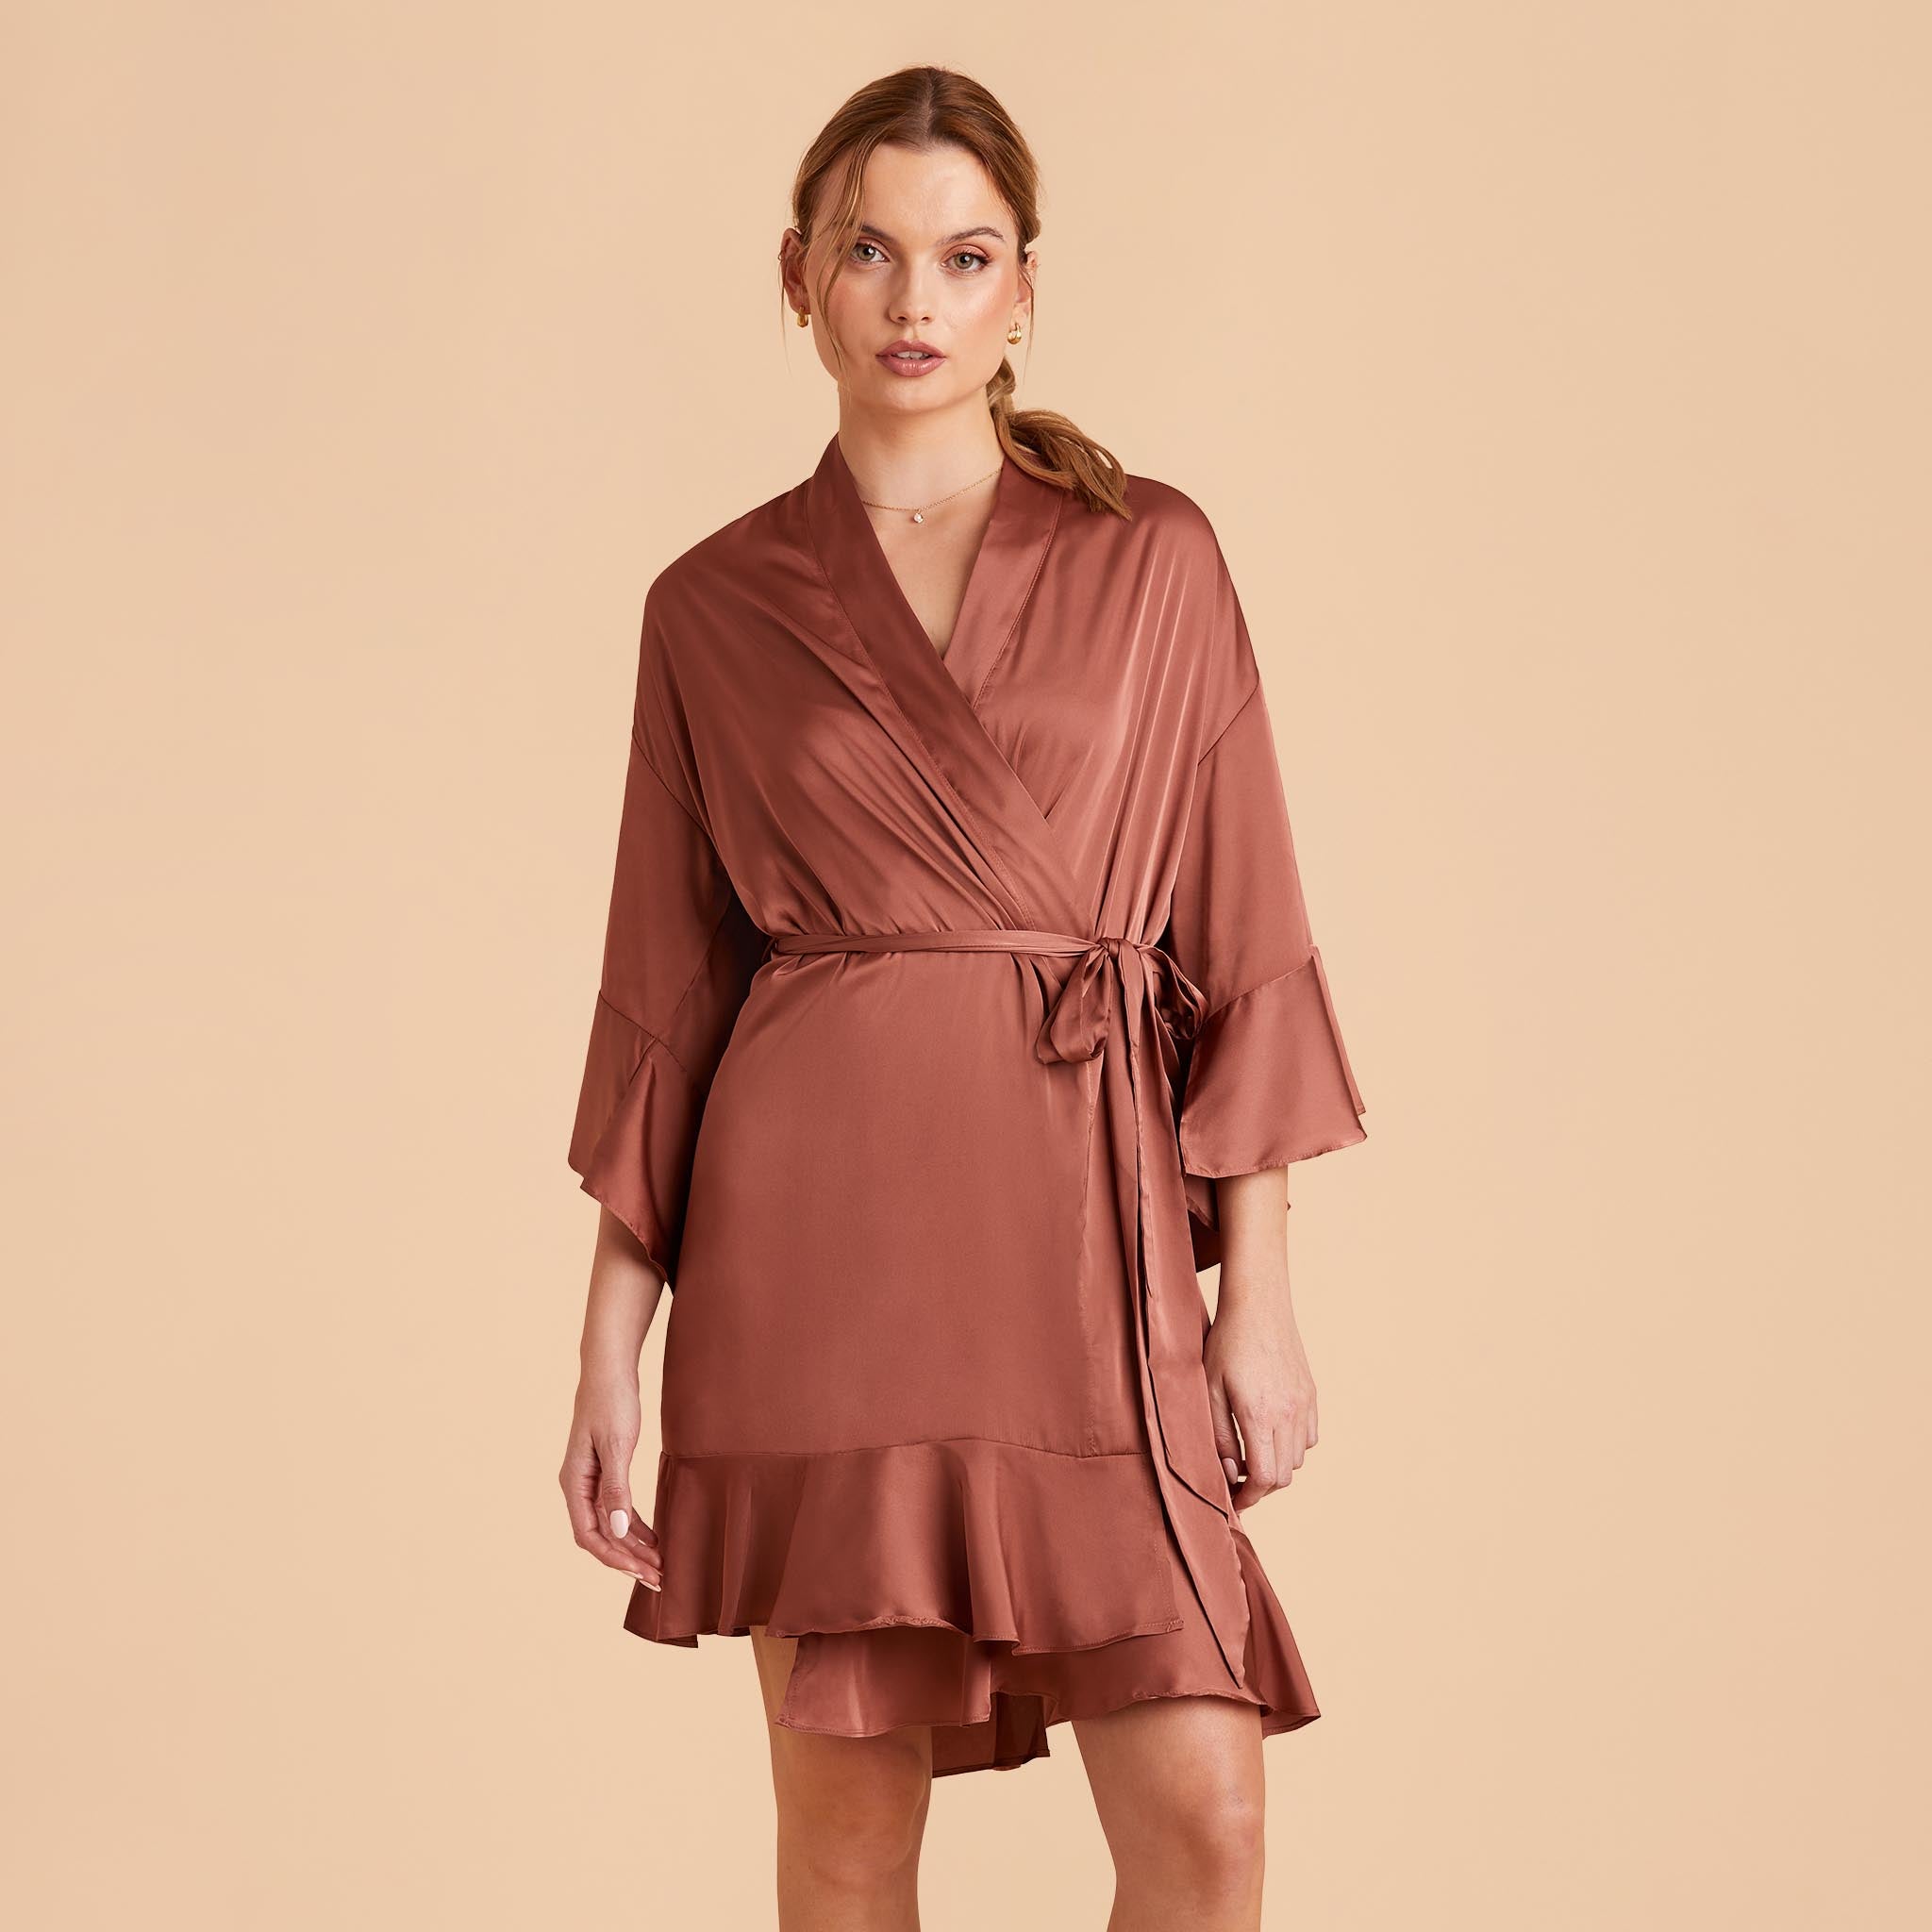 Kenny Ruffle Robe in desert rose satin by Birdy Grey, front view